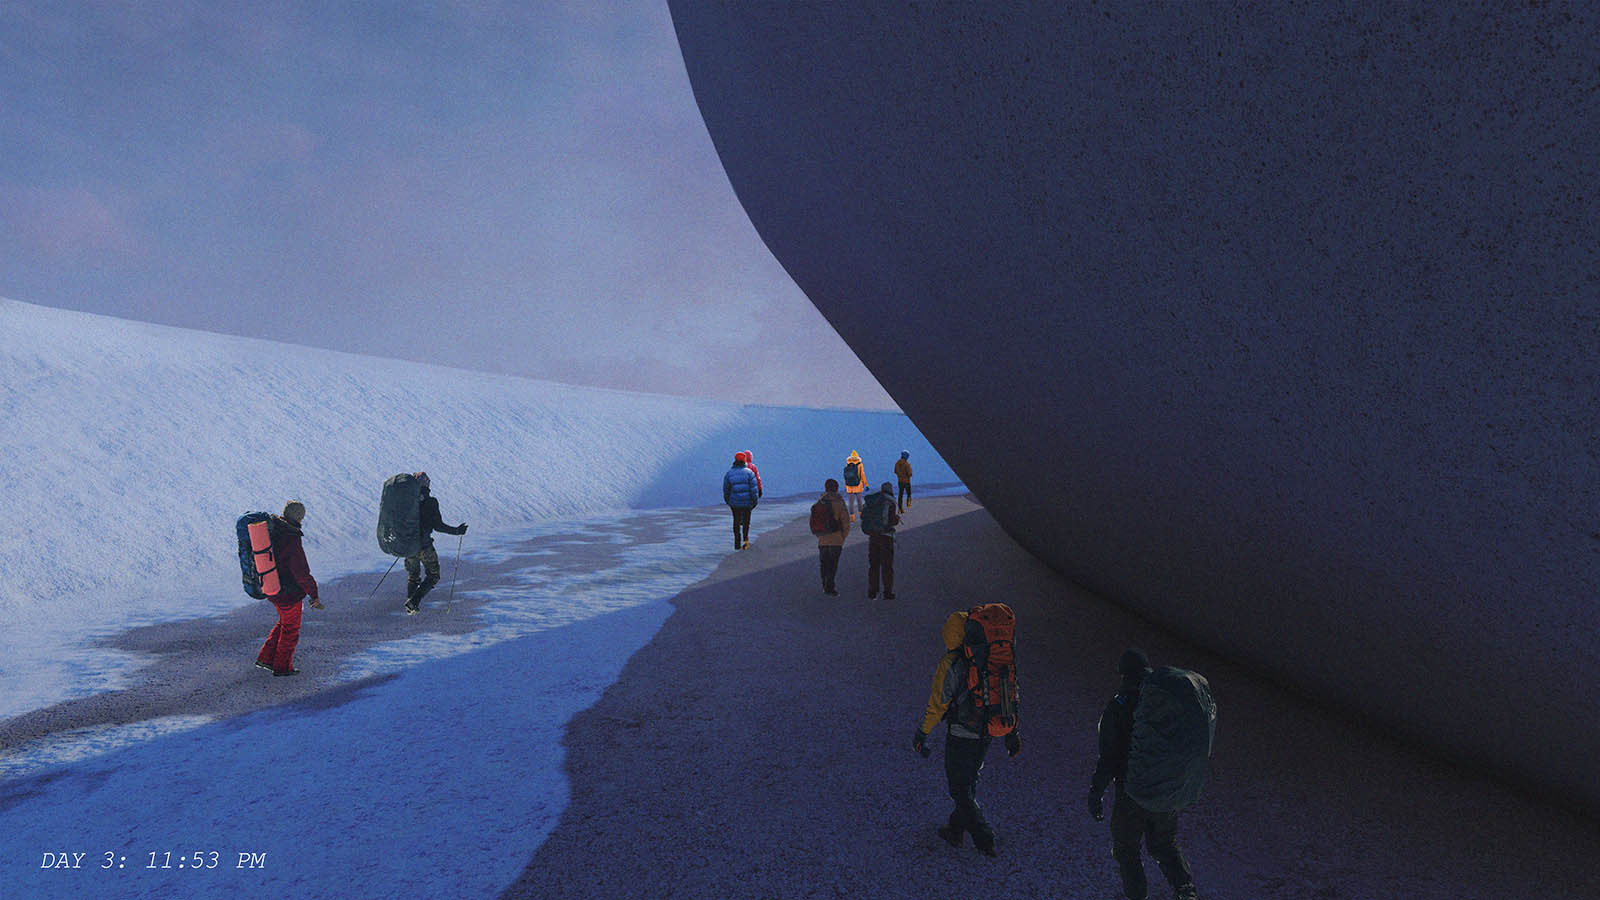 visualization of people in large backpacks walking around in an extraterrestrial setting; large orb in right corner casts a shadow on the scene